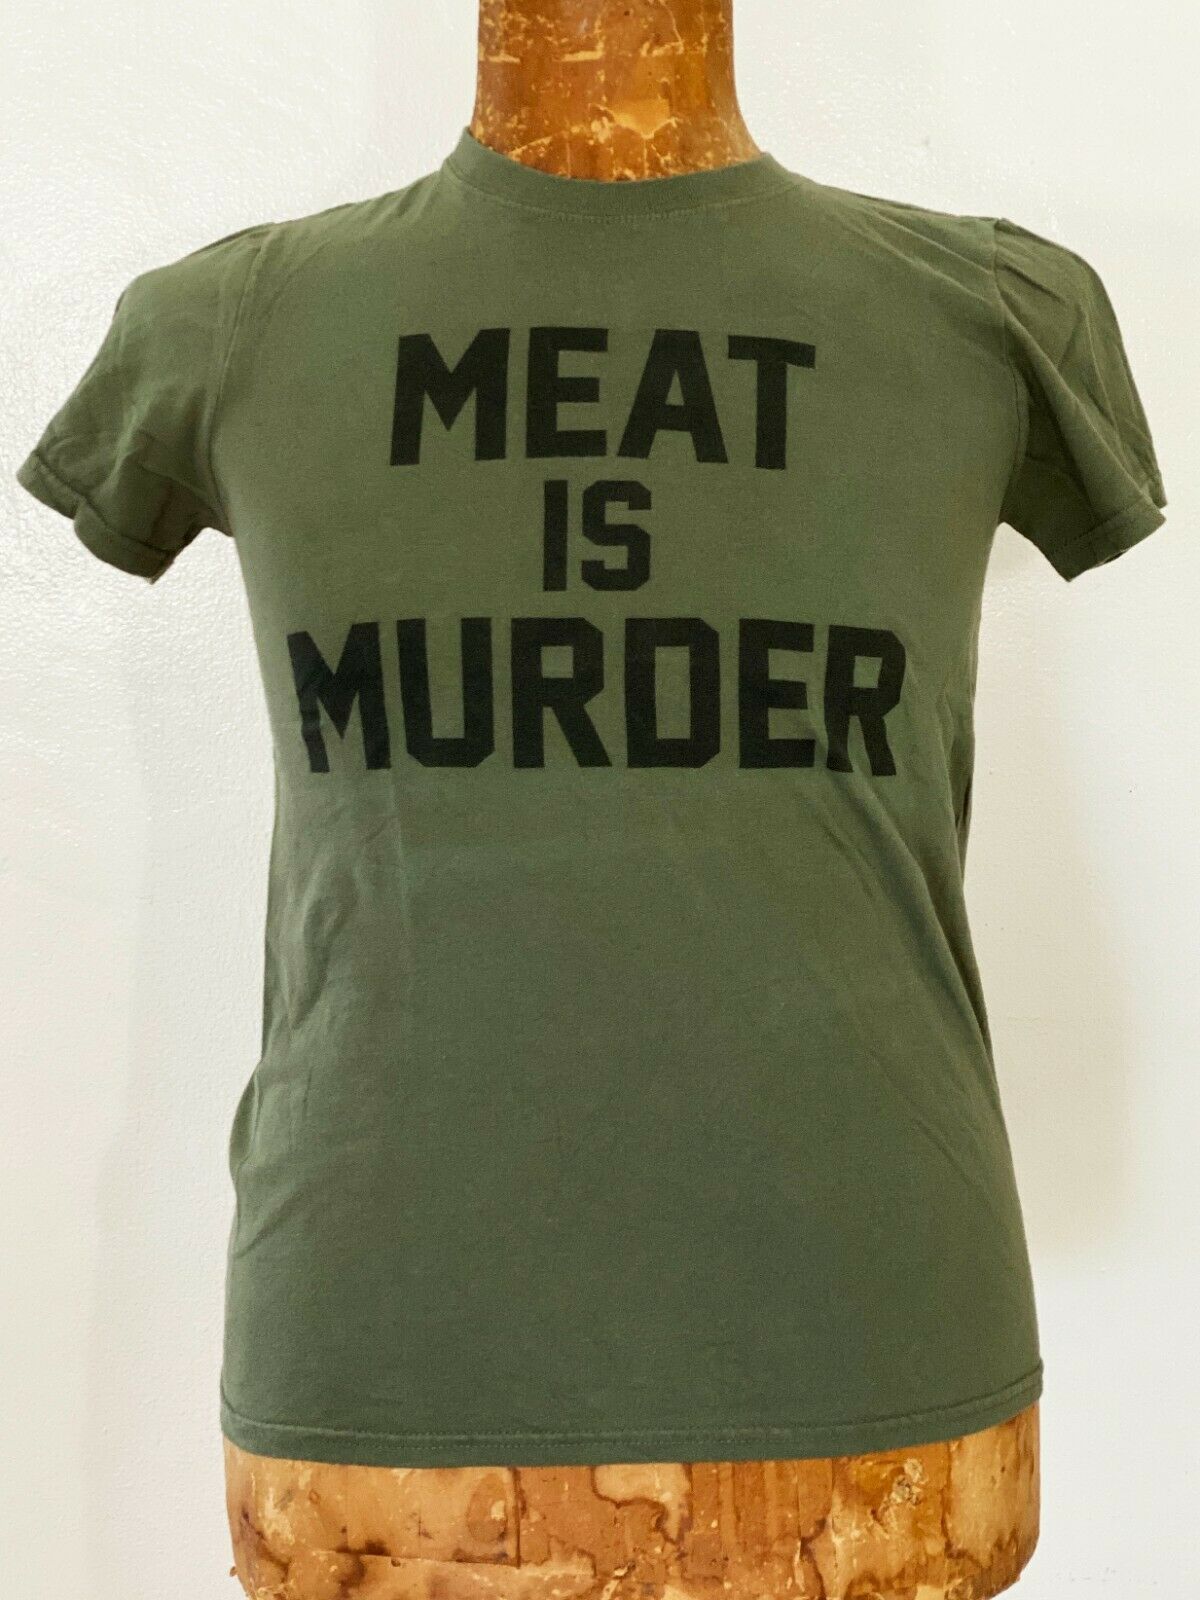 Morrissey The Smiths Concert T-shirt, Unisex S, Meat Is Murder